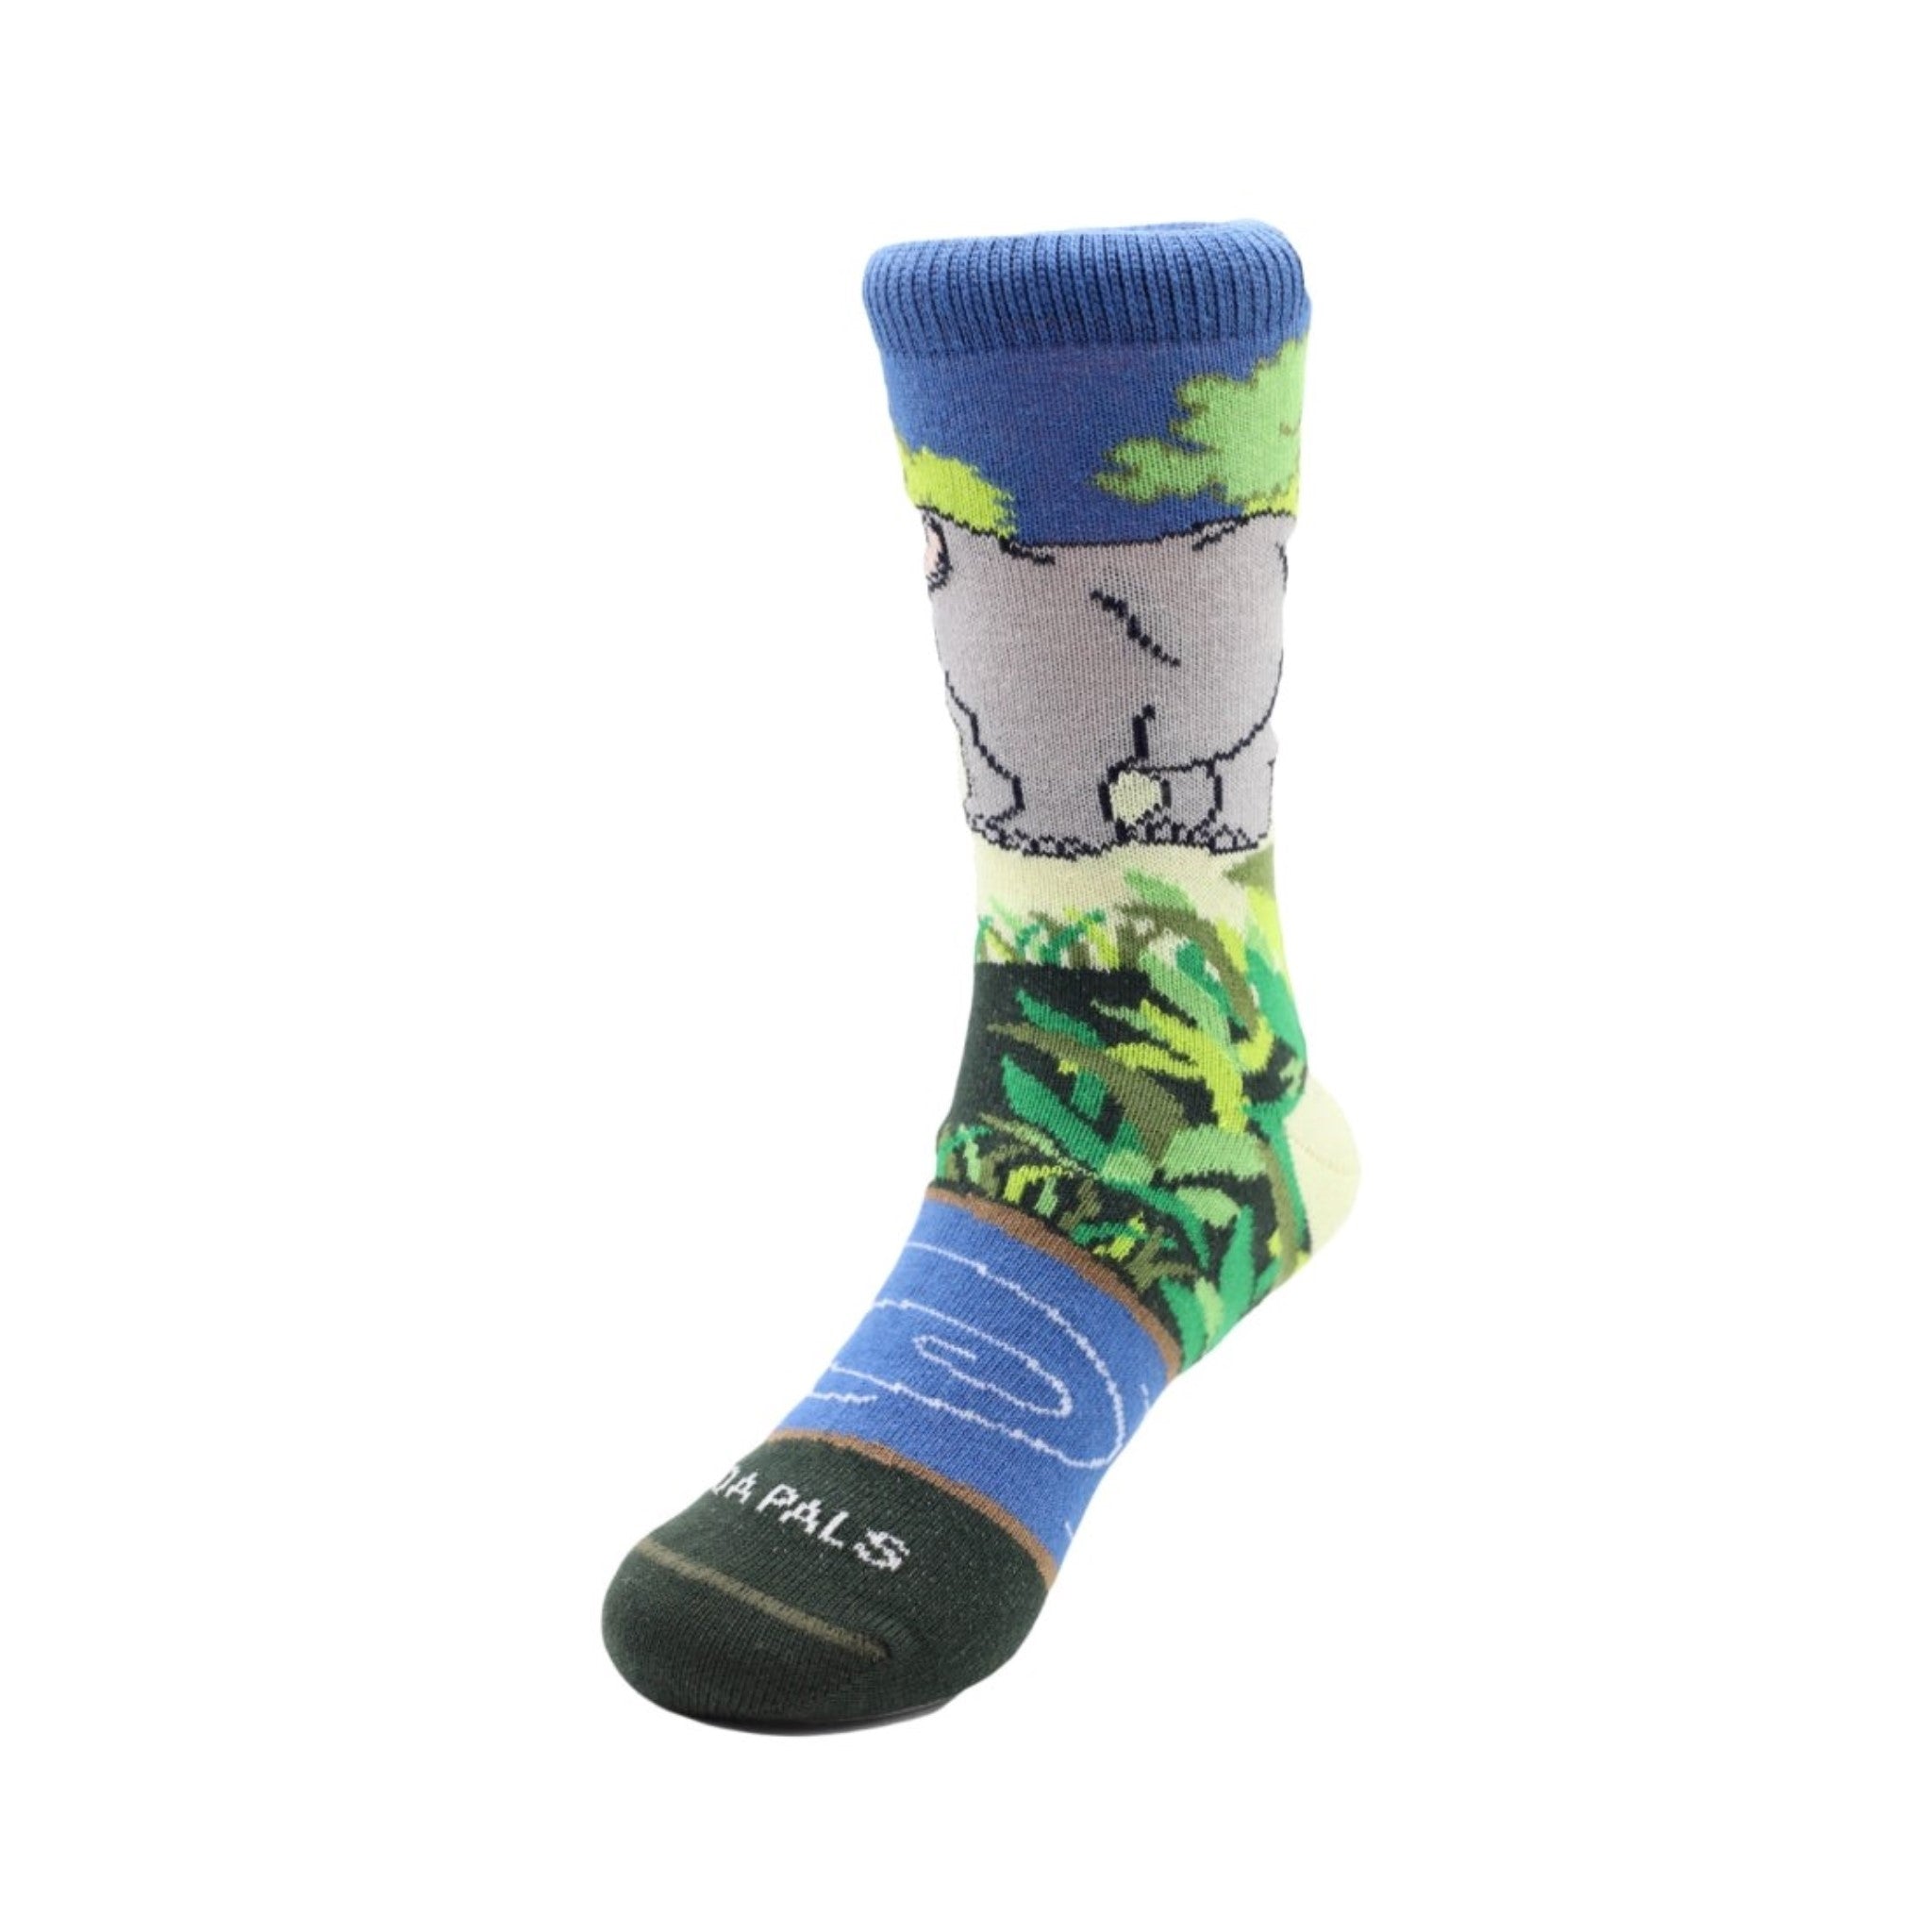 Thabo the Awesome (Rhino Socks) - Ages 3-7